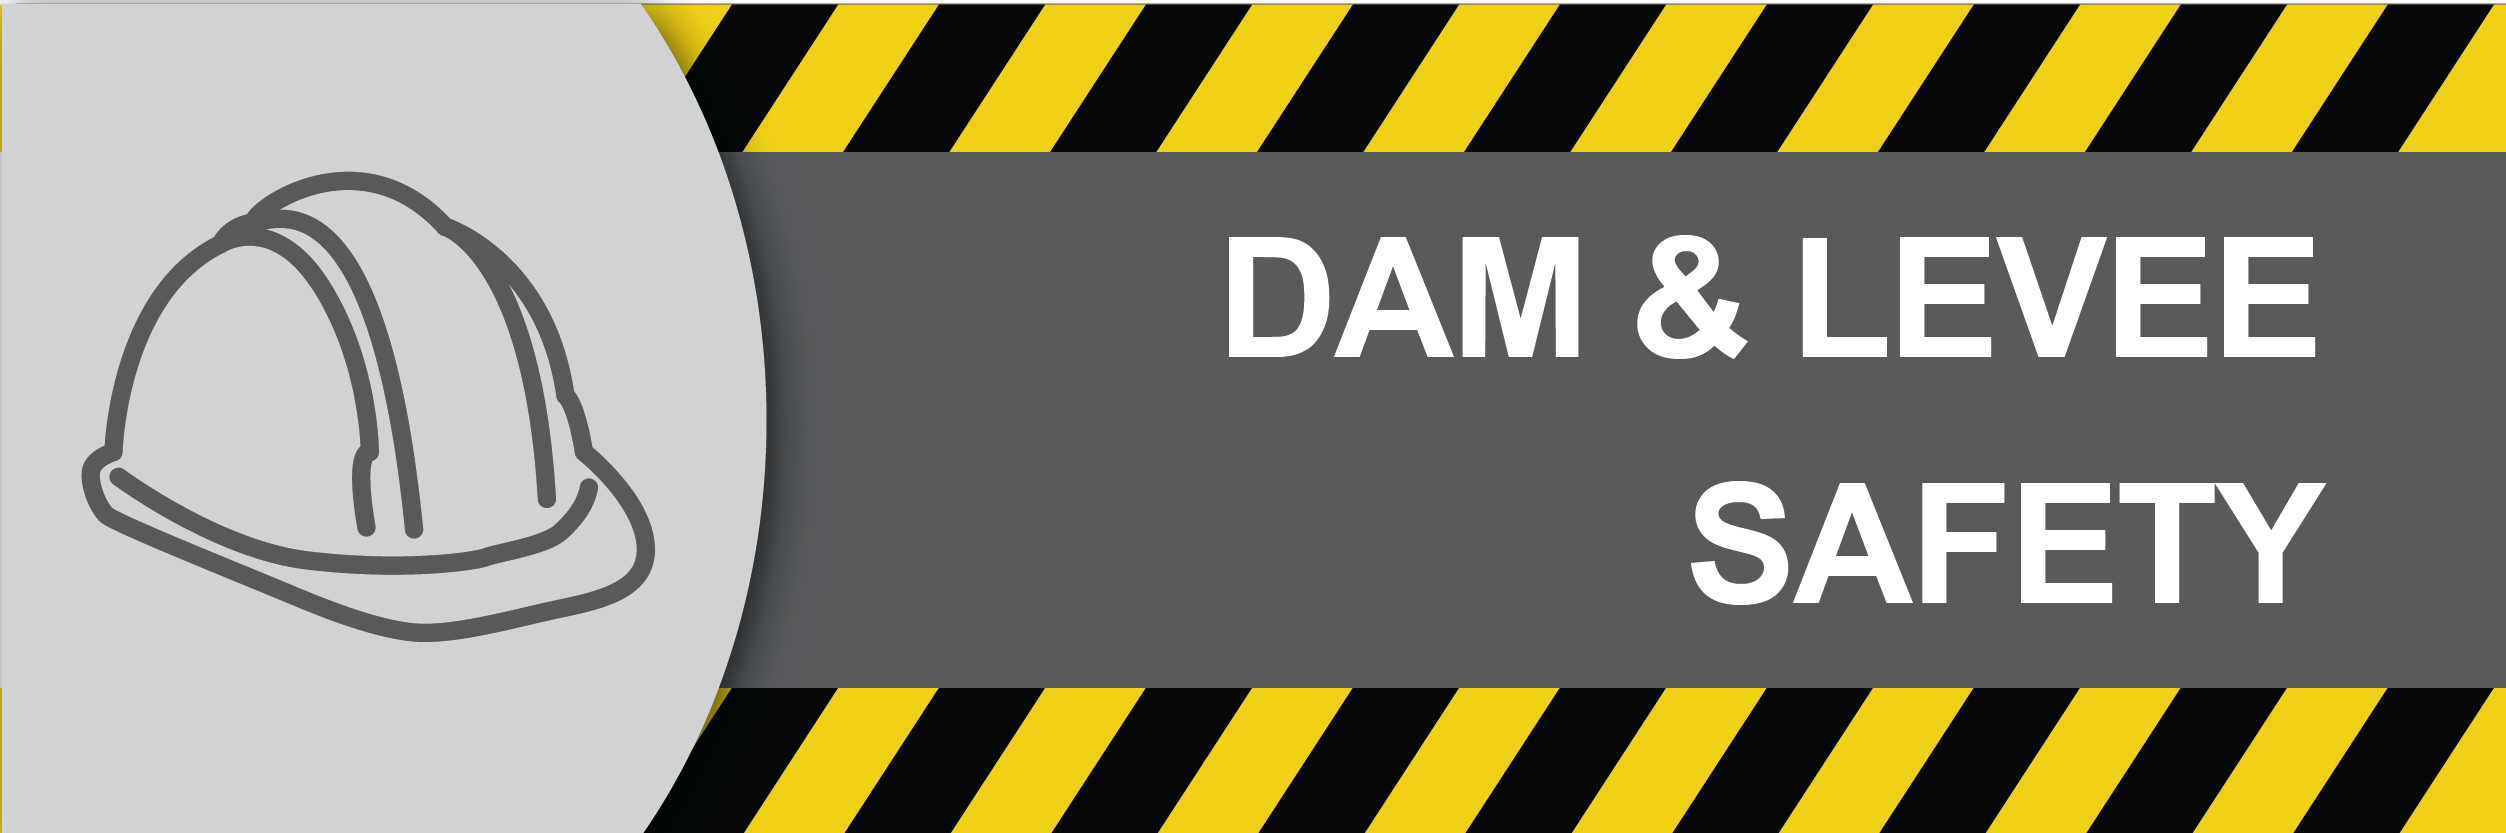 Information on the National Inventory of Dams, National Levee Database and general dam and levee safety